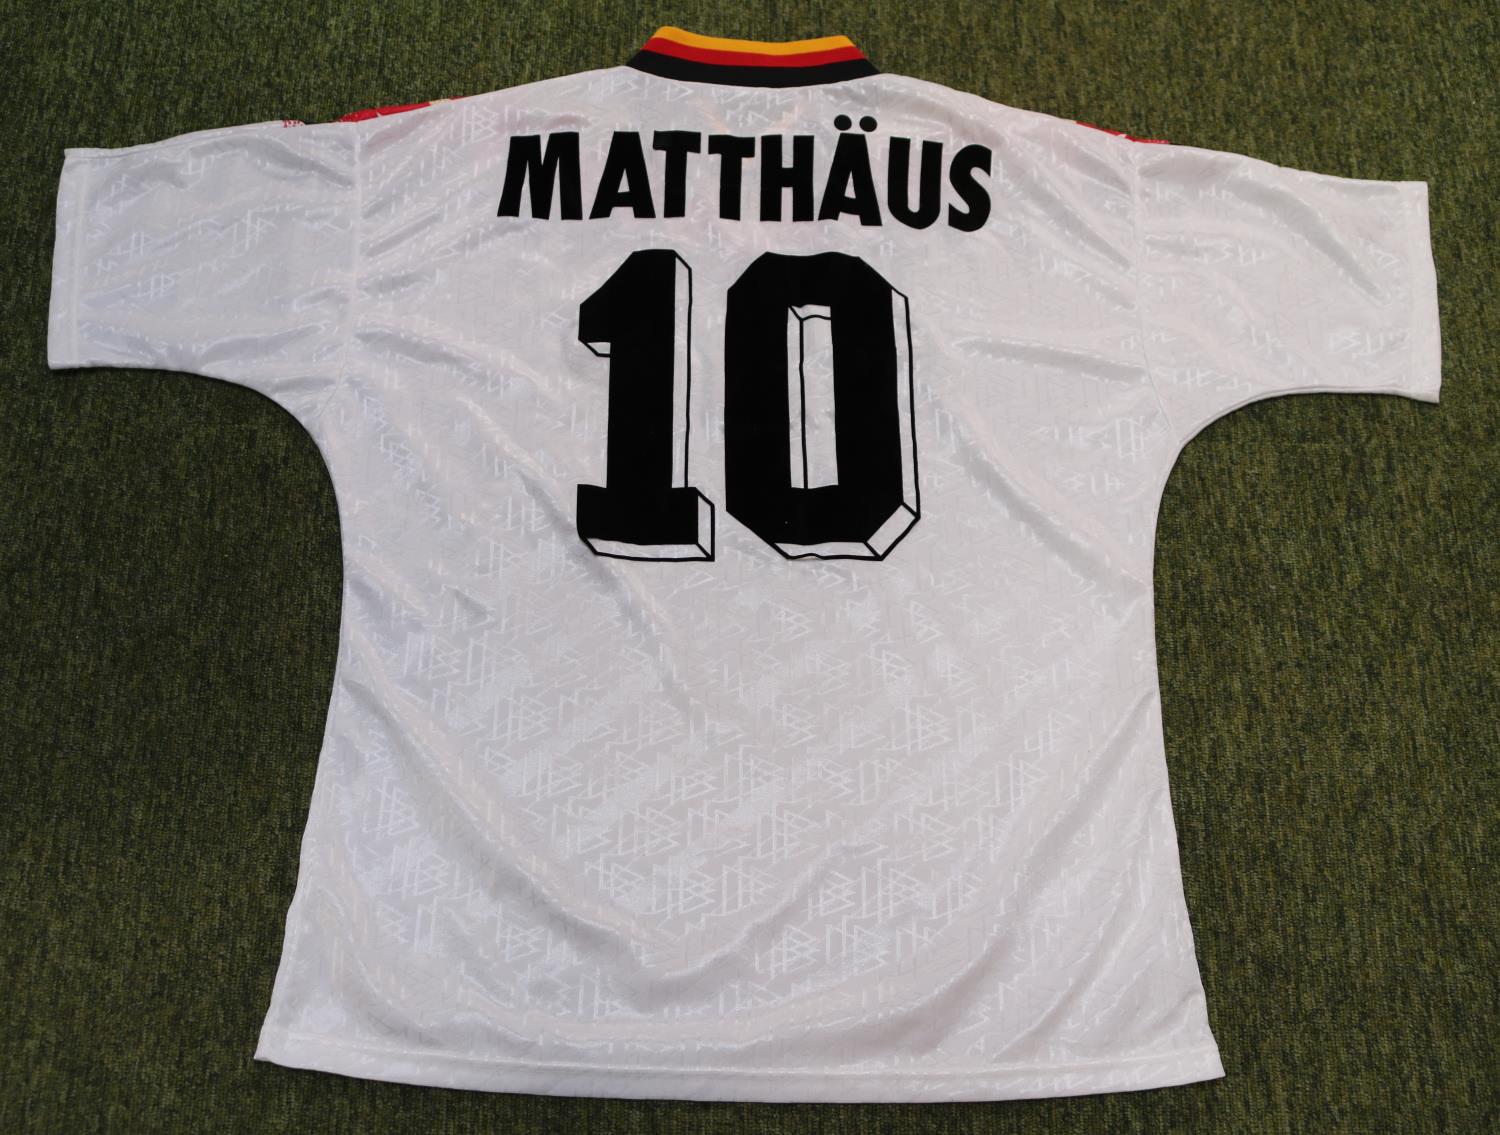 LOTHAR MATTHAUS 1994 FIFA WORLD CUP MATCH WORN #10 GERMANY JERSEY The white short-sleeved jersey was - Image 6 of 7